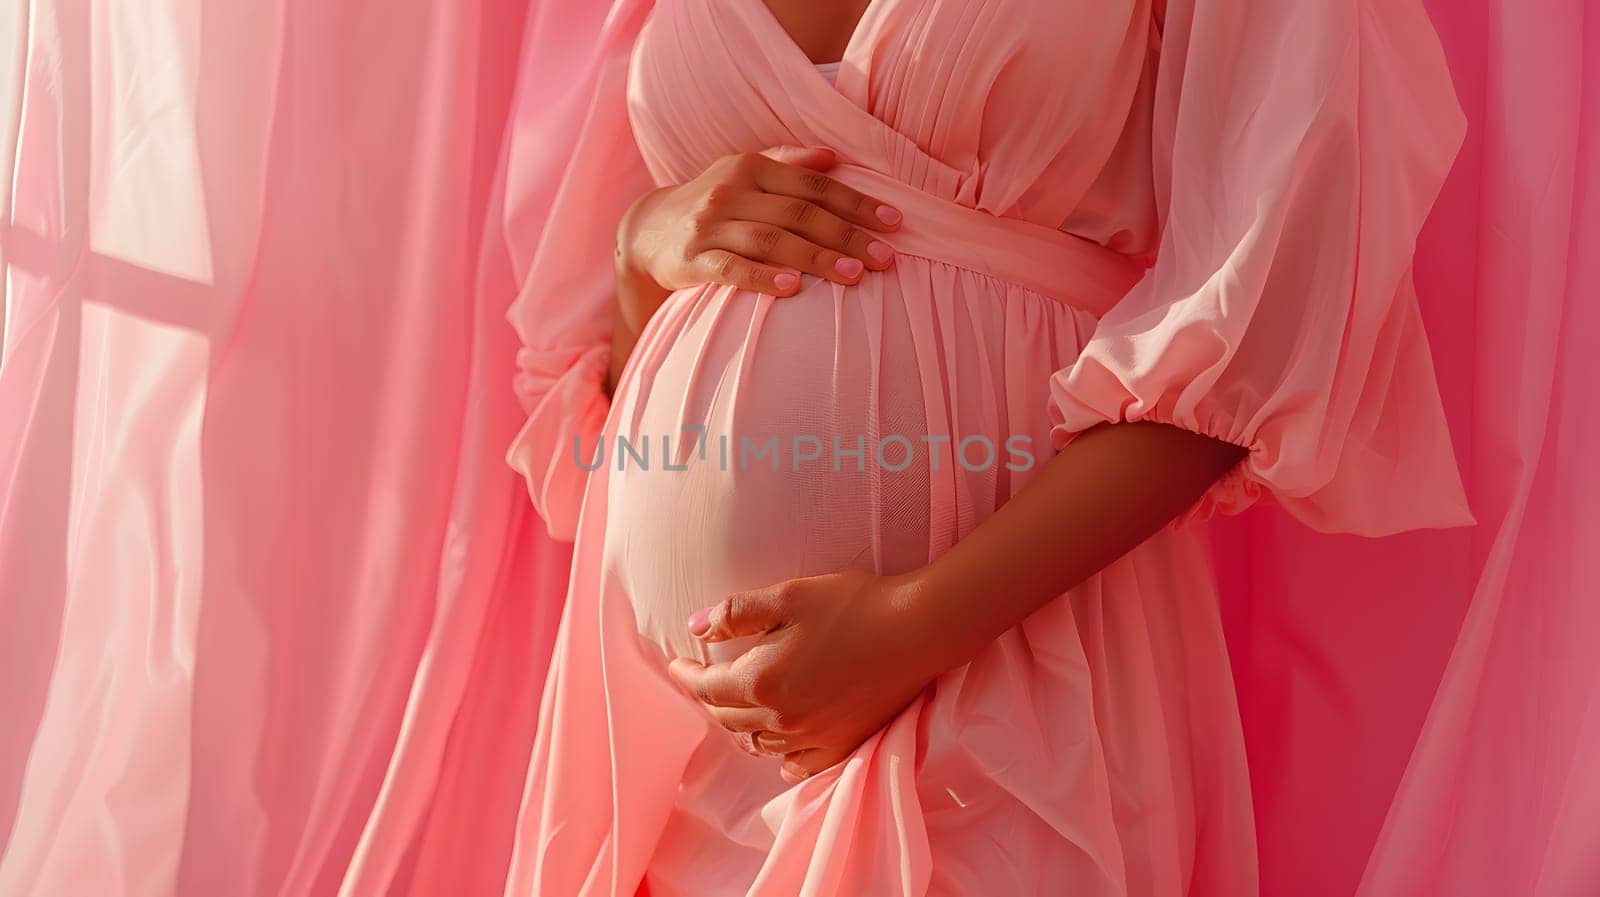 A pregnant woman in a magenta dress is gently touching her belly with a petal pink sleeve in a tender gesture, standing by the window at an event or entertainment venue